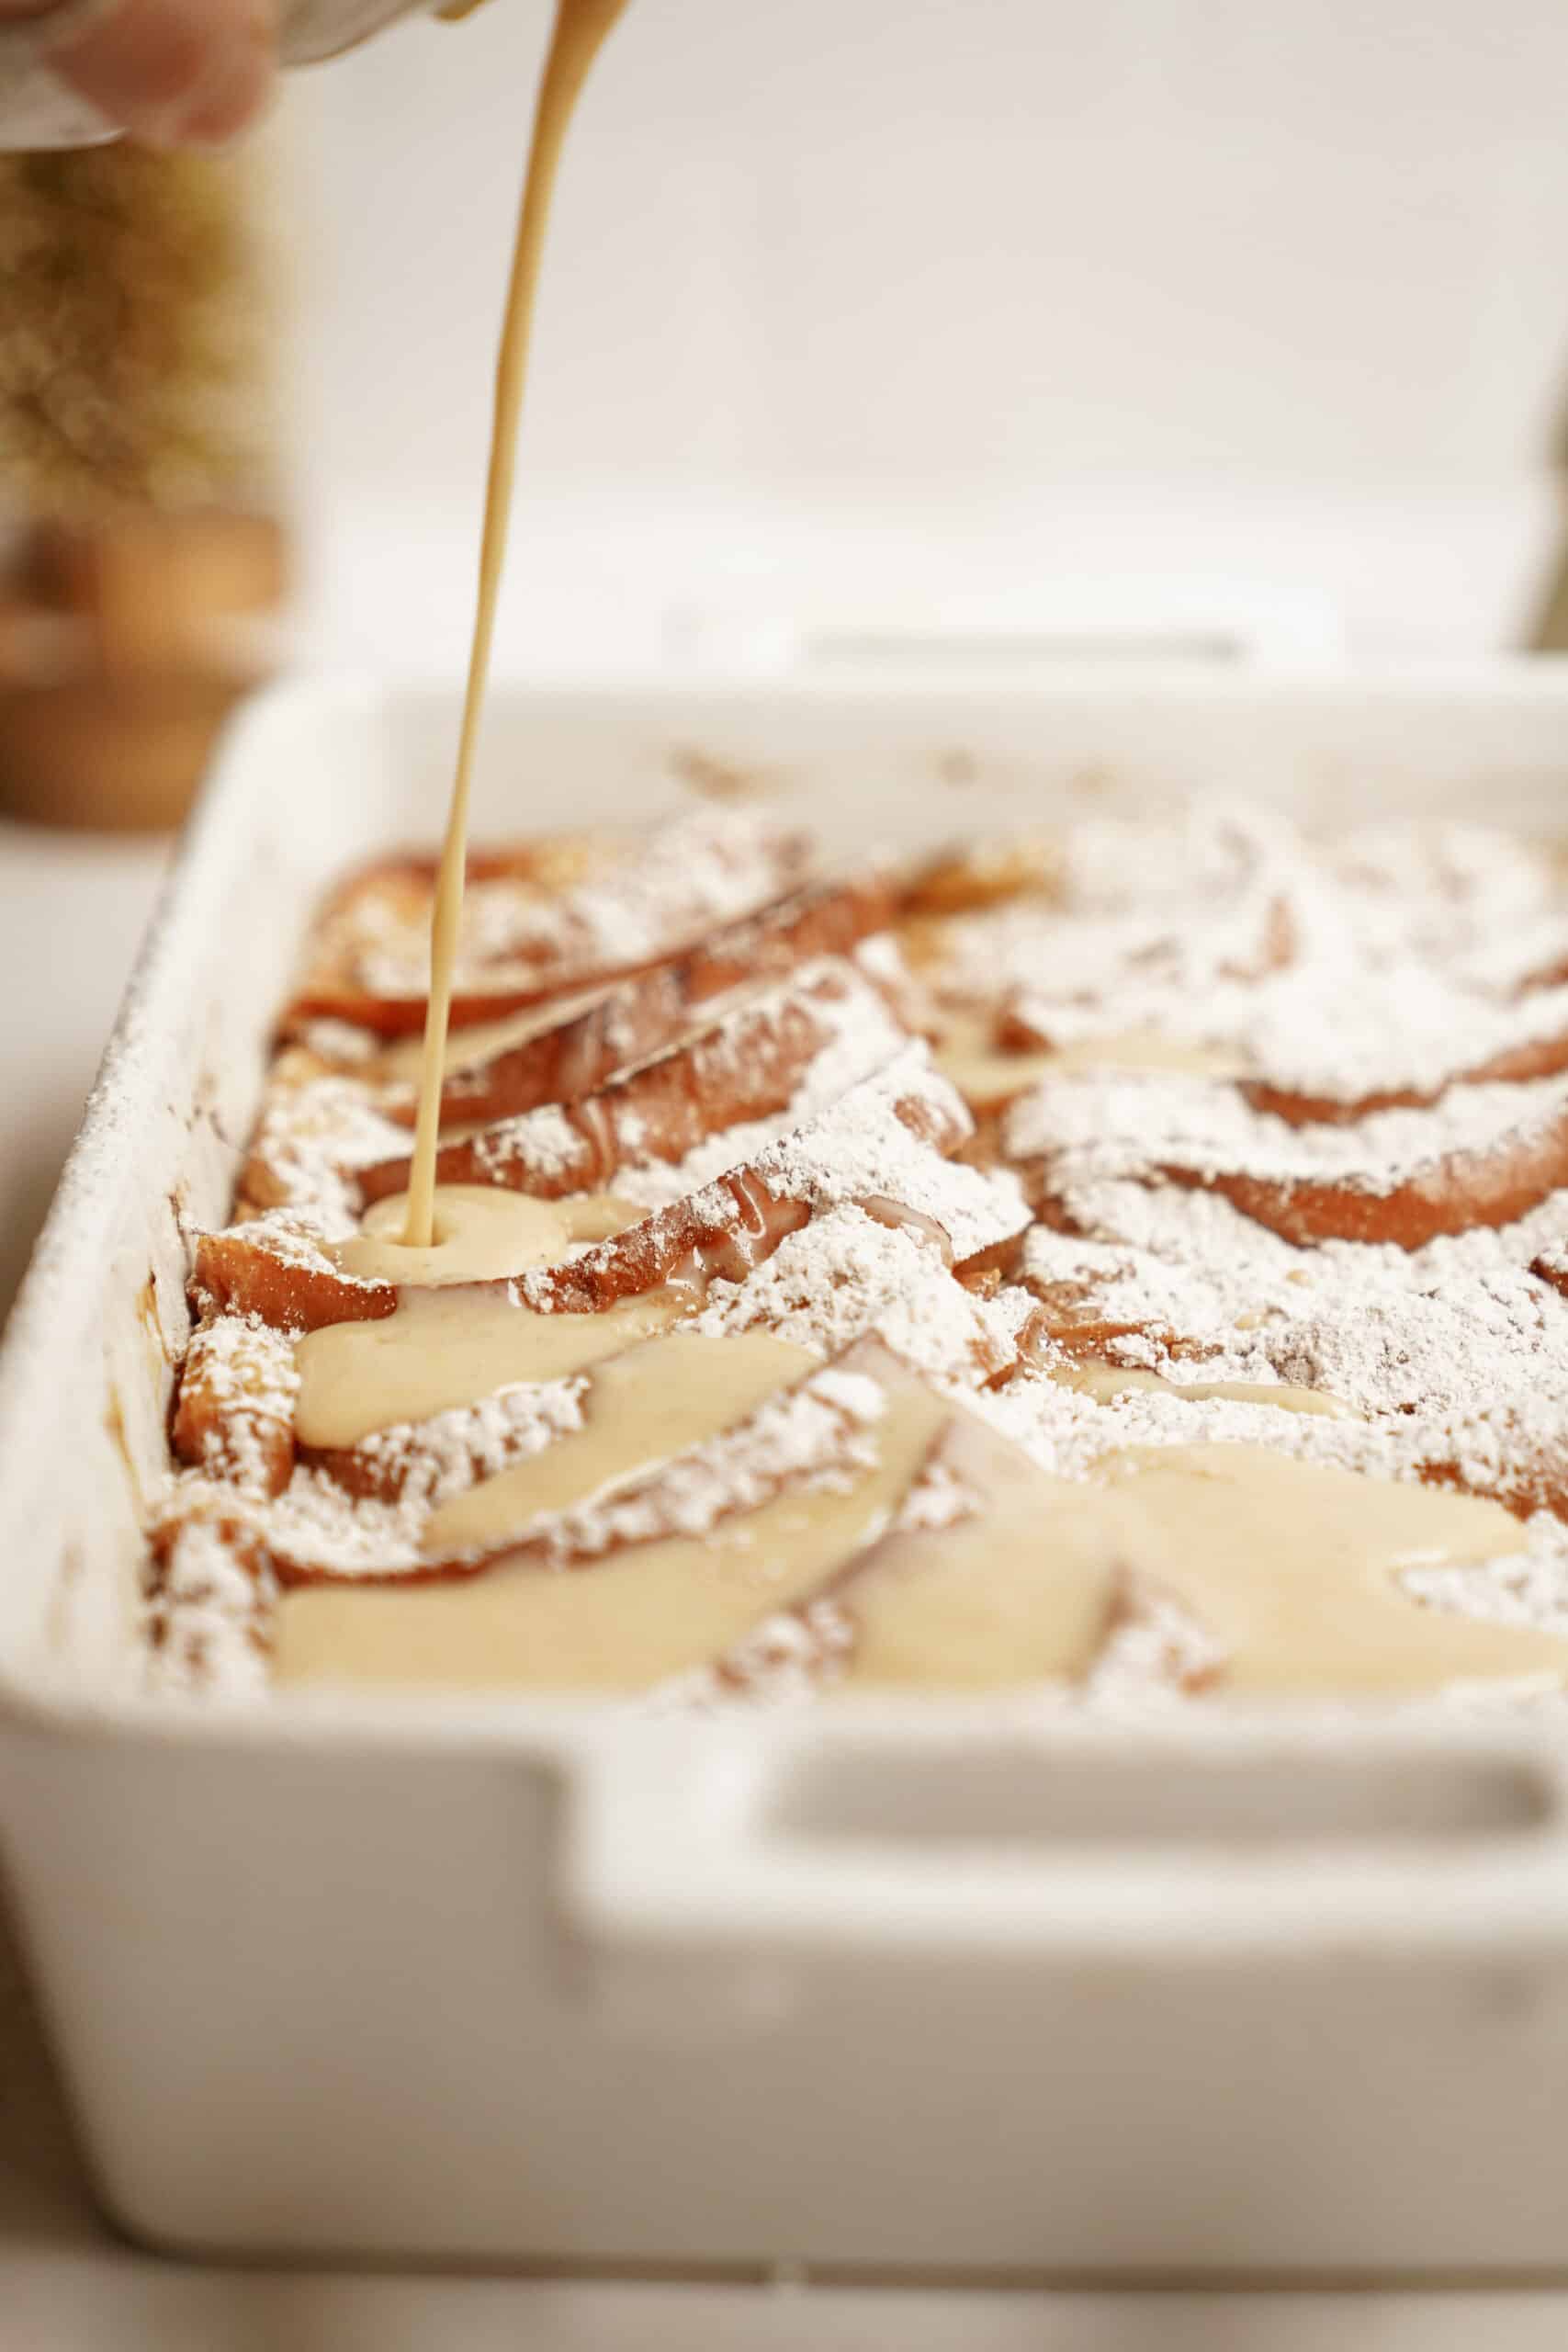 Baked French Toast Recipe in casserole dish with sauce being poured ontop